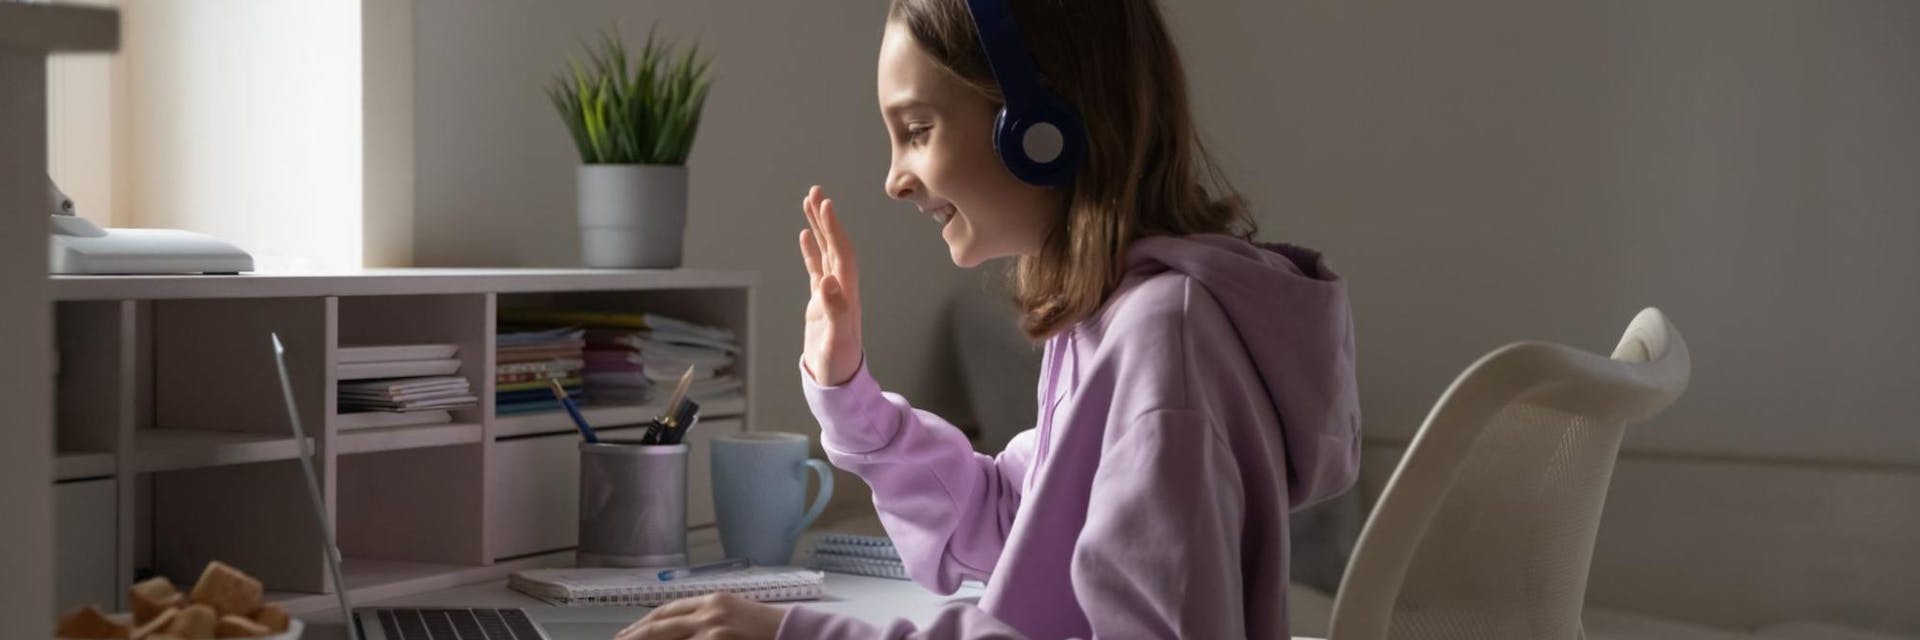 A young girl waves at her math tutor while sitting in her room on her computer.